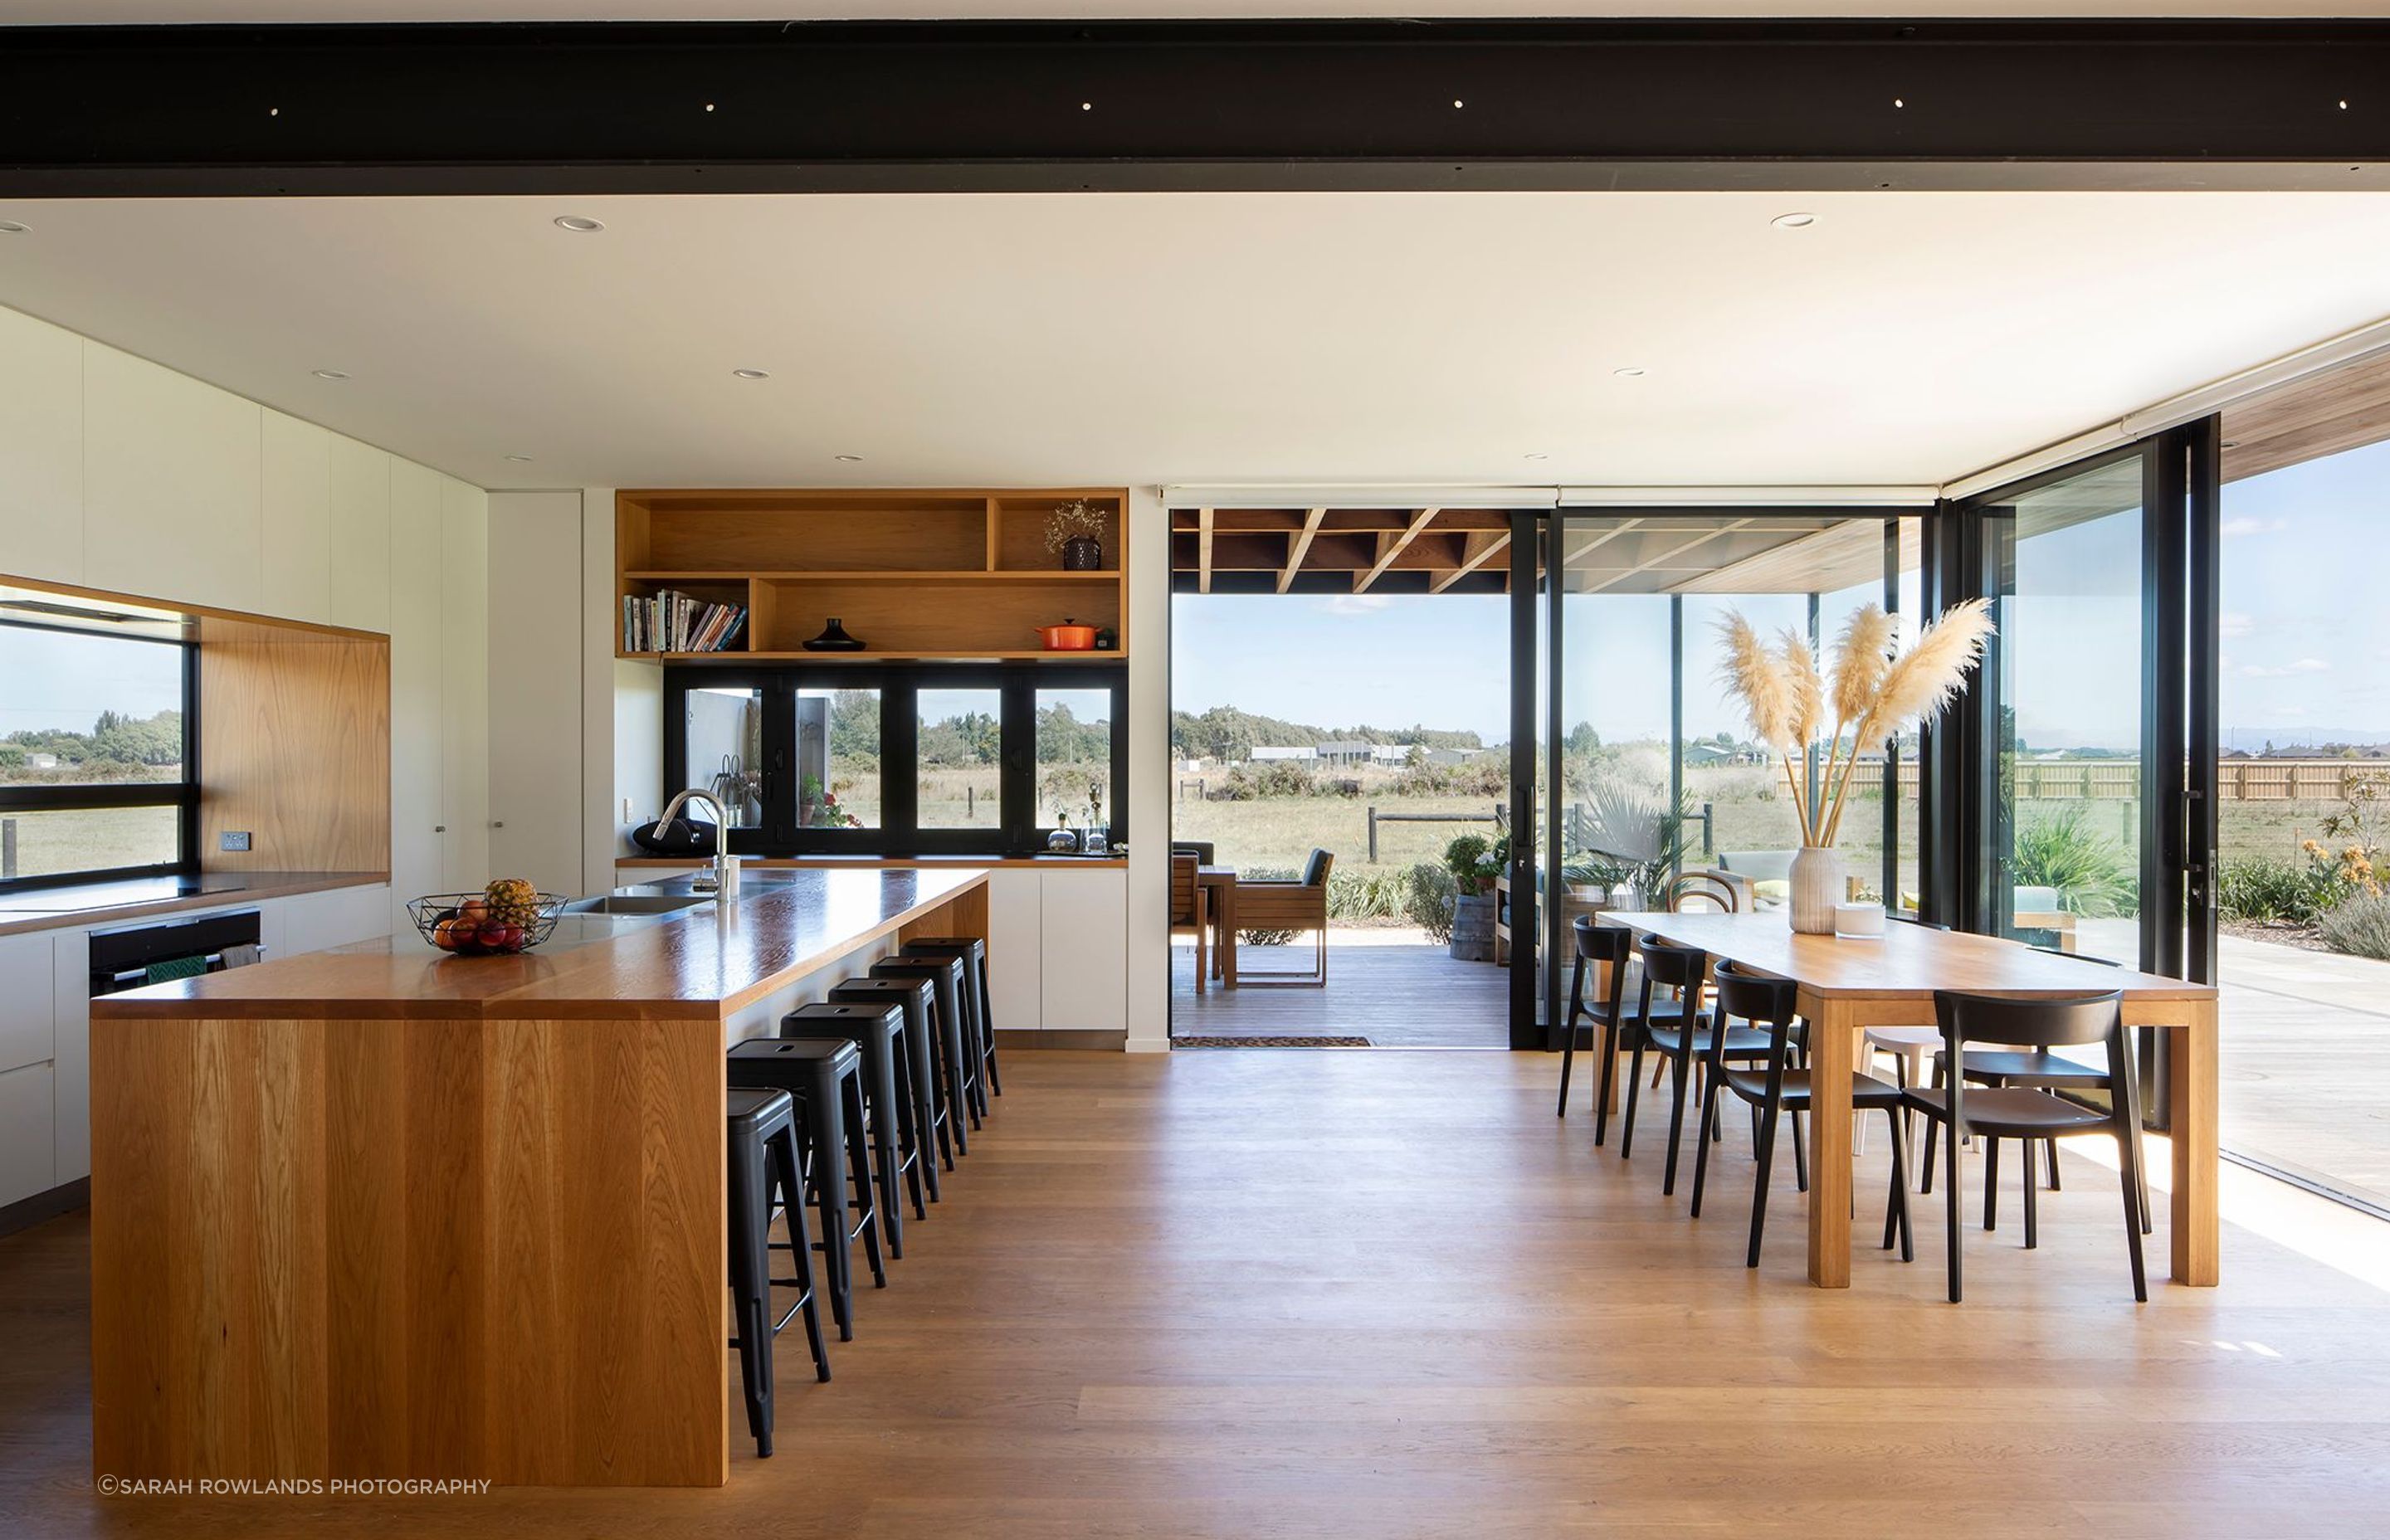 The open-plan kitchen and dining space looking through to the outdoor room and the rural landscape. From the kitchen, the homeowners can also observe visitors coming up the driveway.